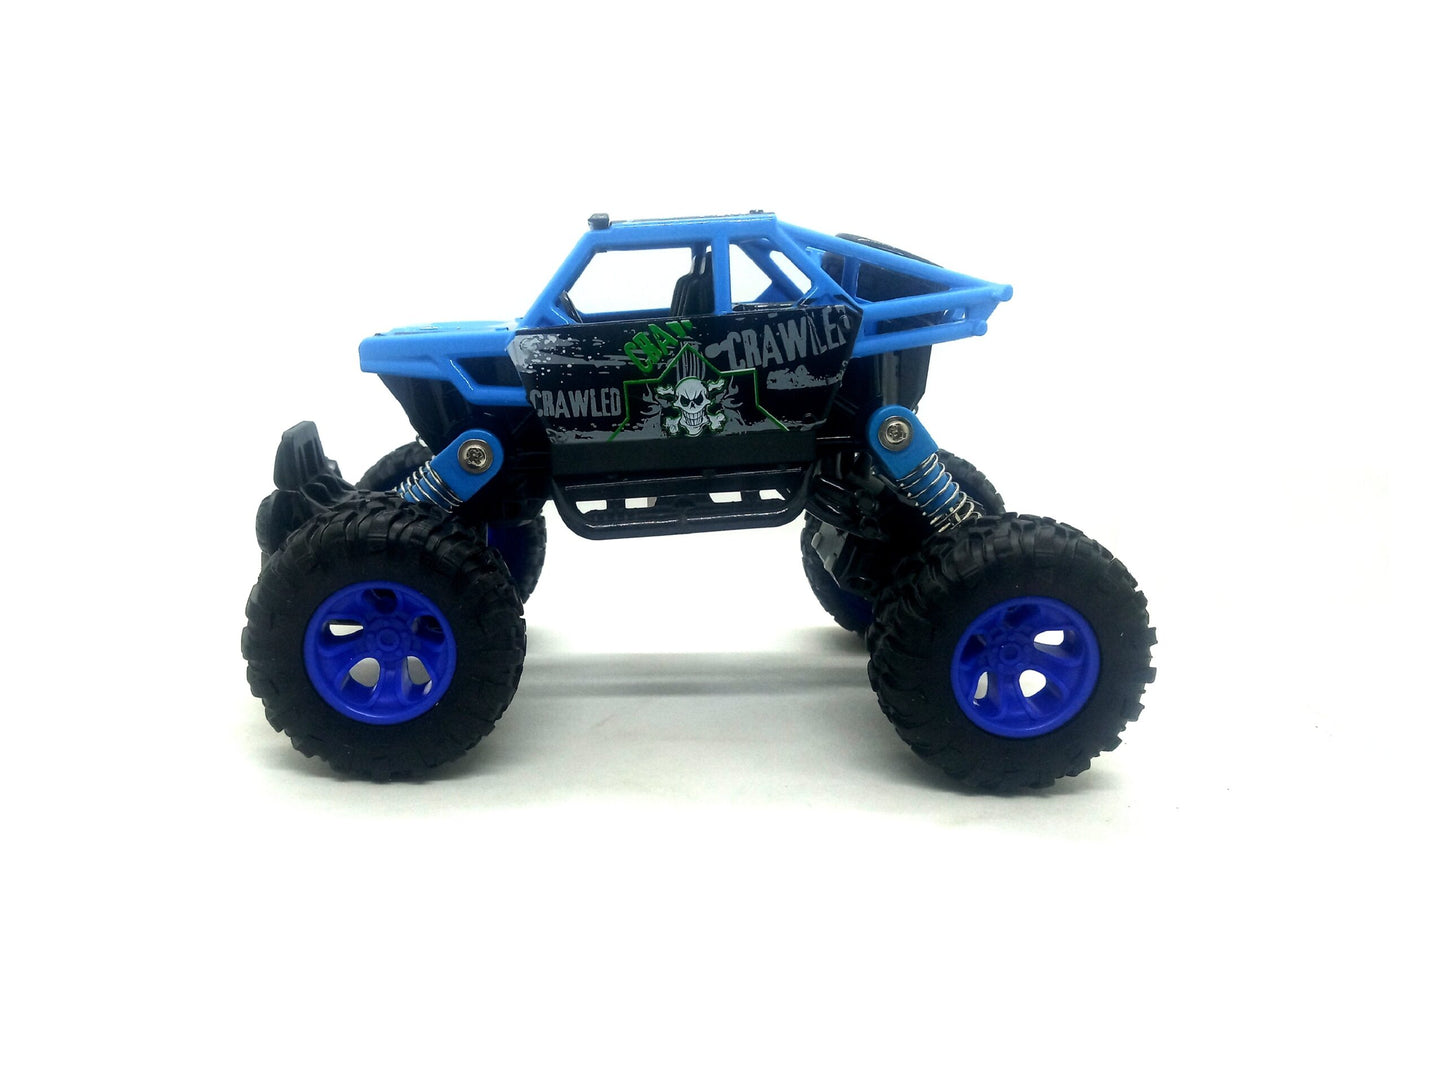 Amazing Graphic Printed Rock Crawler 2.0 Four Way Pull back Metal Diecast High Speed Long Distance Drive Friction Powered Off-Road 4 Wheel Car Toy